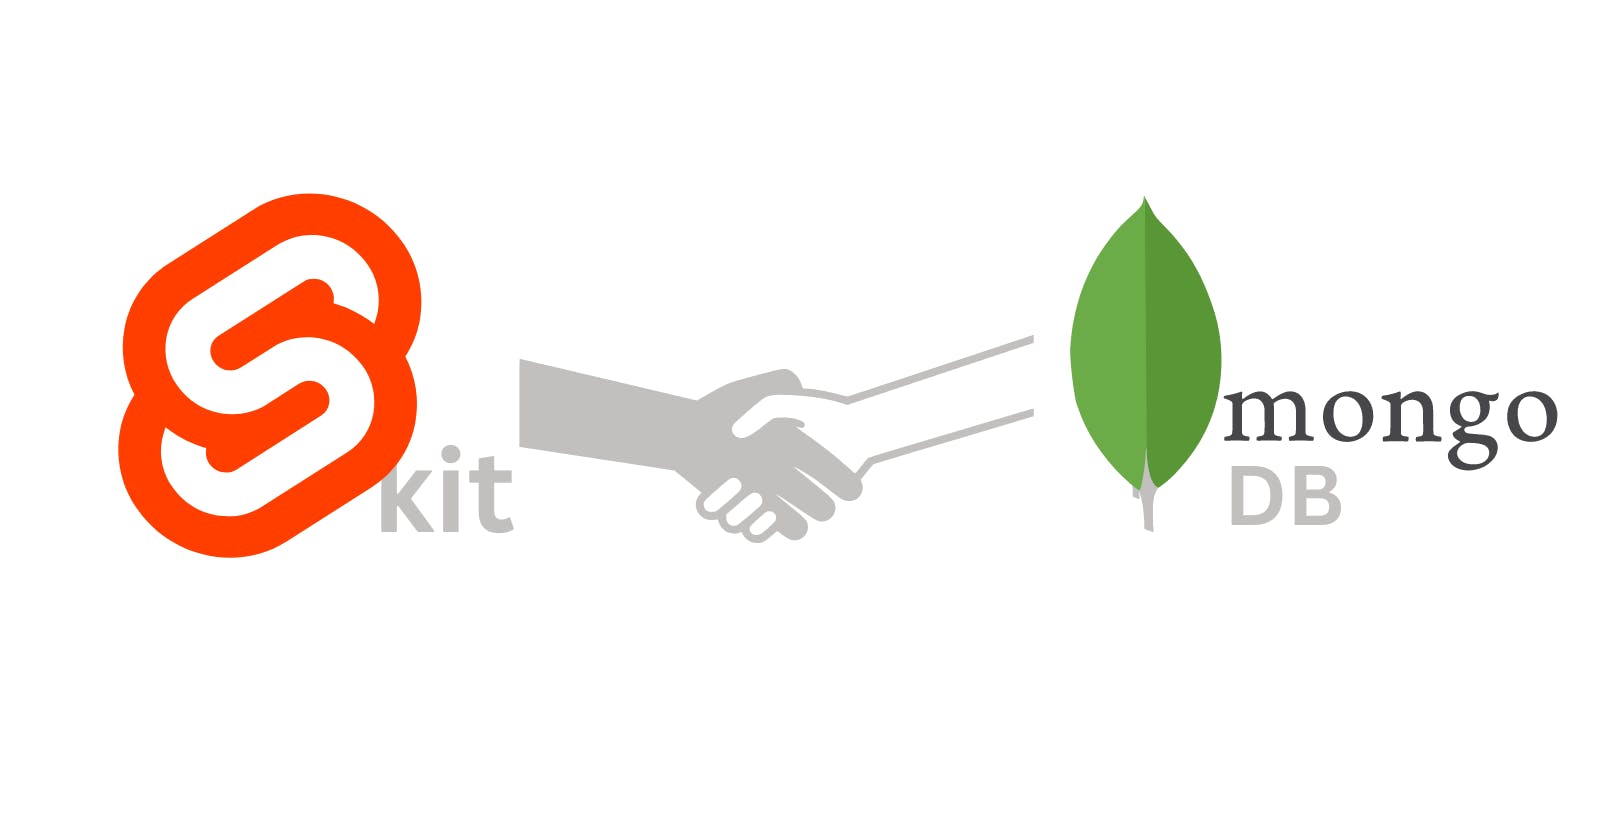 How to connect to a MongoDB database in Sveltekit